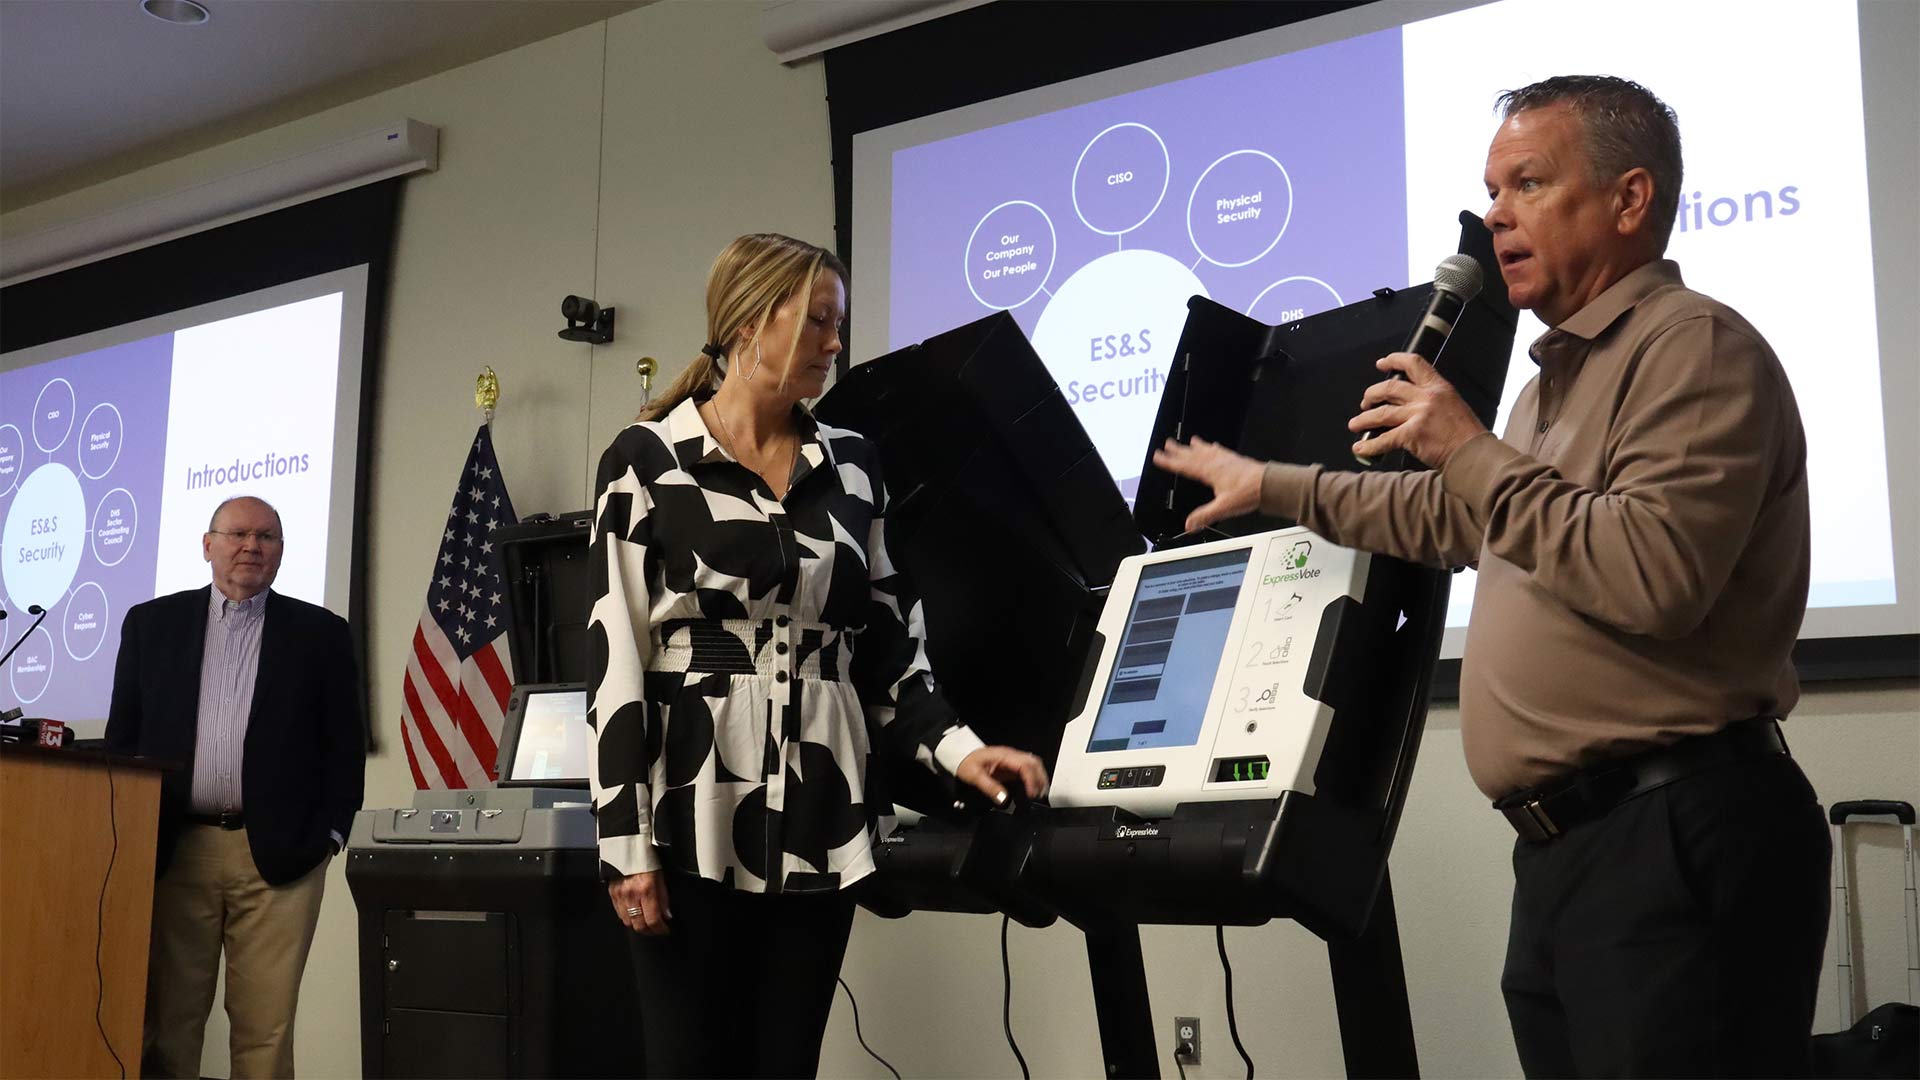 Election Systems & Software Vice President of Sales Bryan Hoffman (right) walks the audience through a demonstration of voting equipment with Arizona Senior Account Manager Susan Parmer (center) and Chief Information Security Officer Chris Wlaschin (left). January 17, 2023.